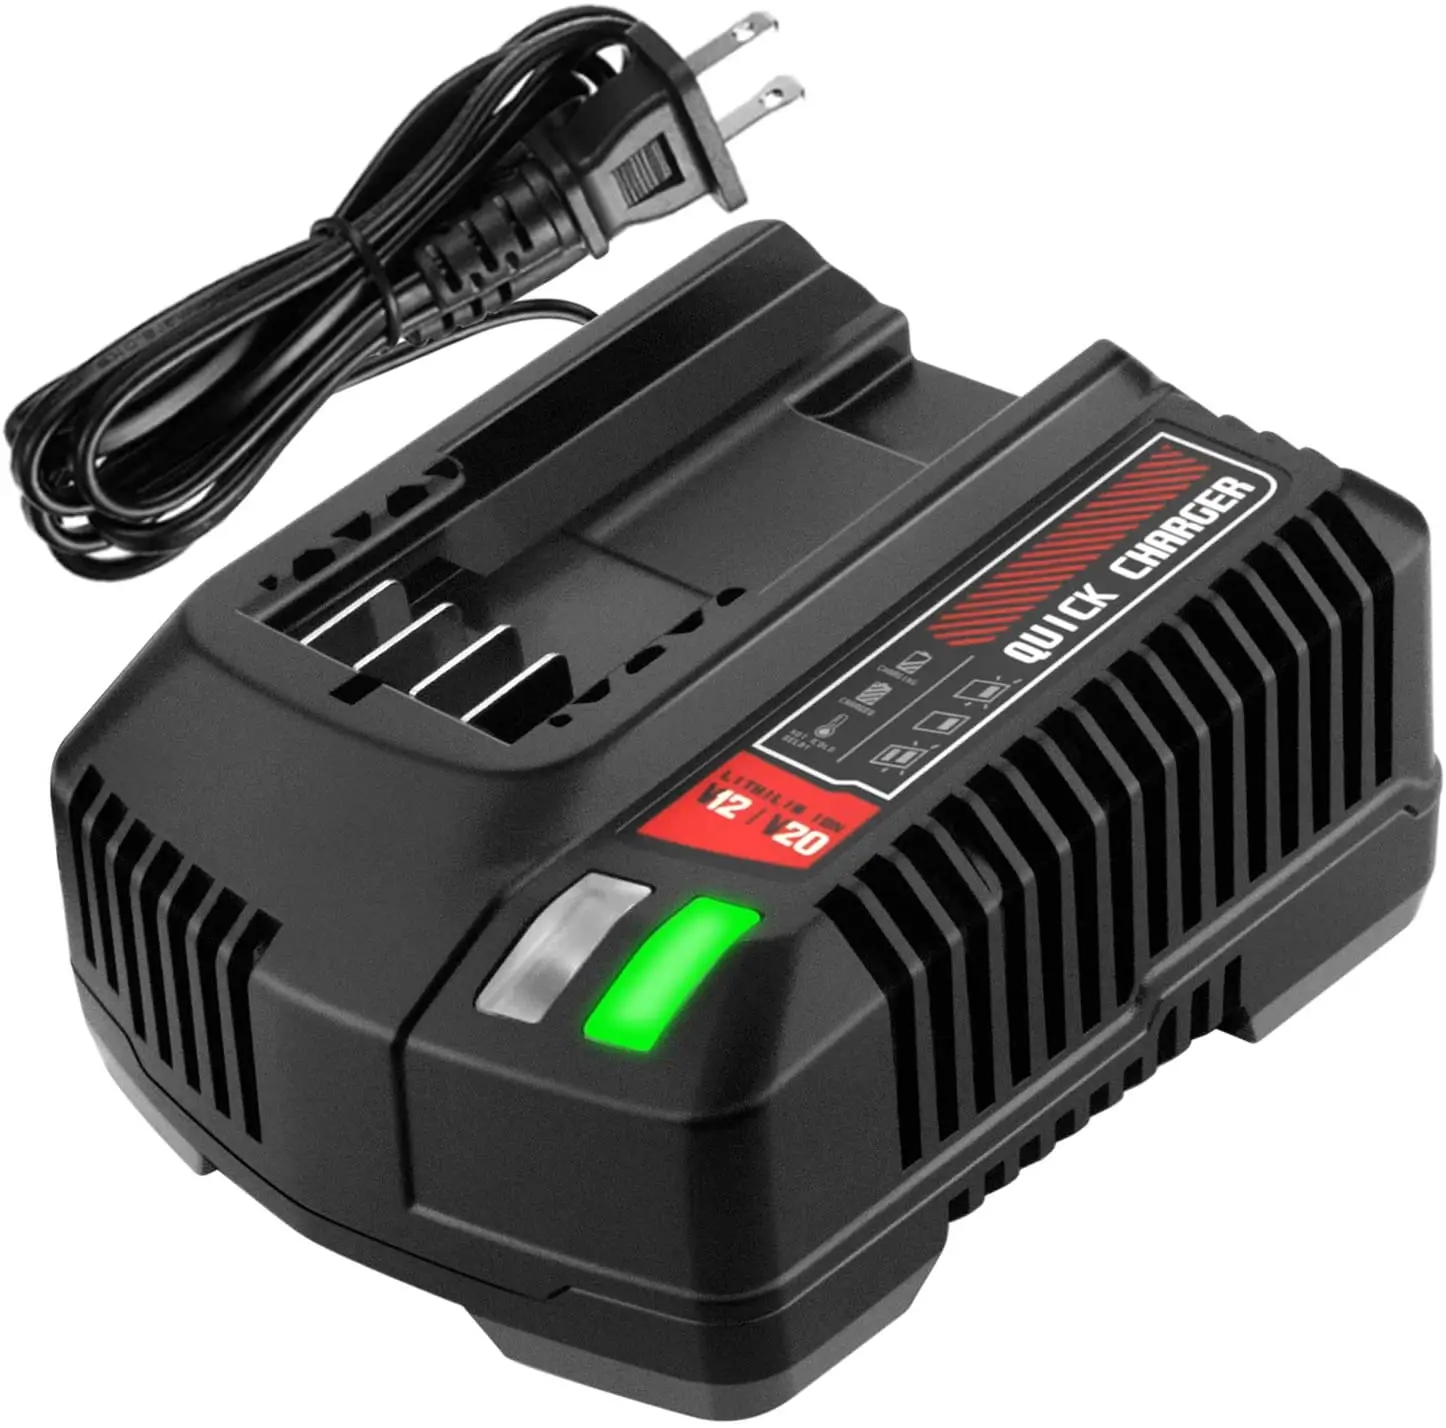 

For CRAFTSMAN 20V 2A Li-ion Battery Charger CMCB102 Rechargeable Power Tool 100V/240V Lithium Battery Charger With Dual USB